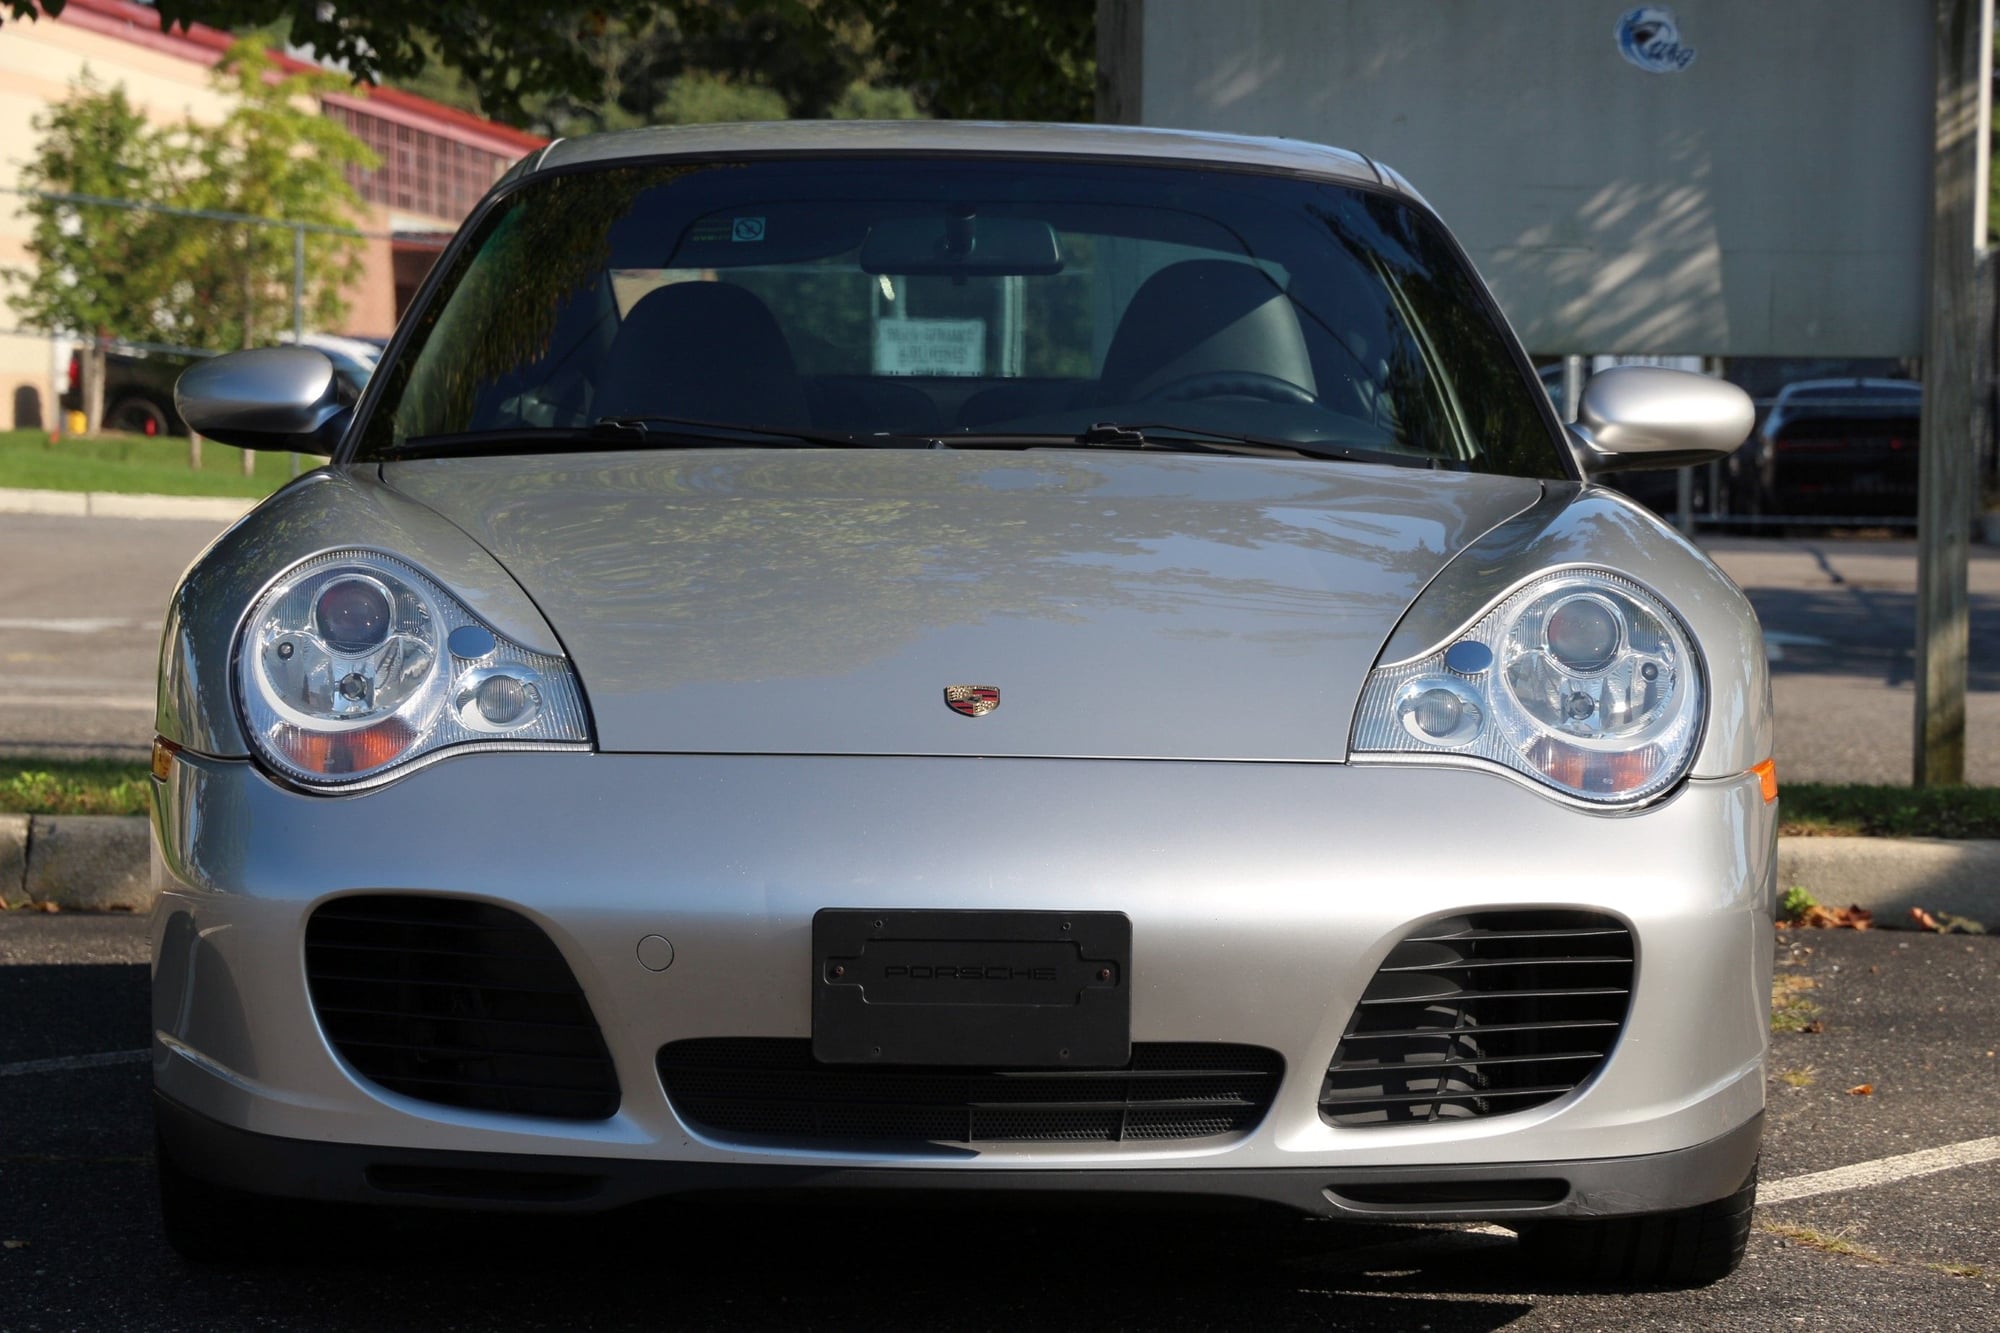 2003 Porsche 911 -  - Used - VIN WP0AA29903S620595 - 61,030 Miles - 6 cyl - AWD - Manual - Coupe - Silver - Brooklyn, NY 11229, United States